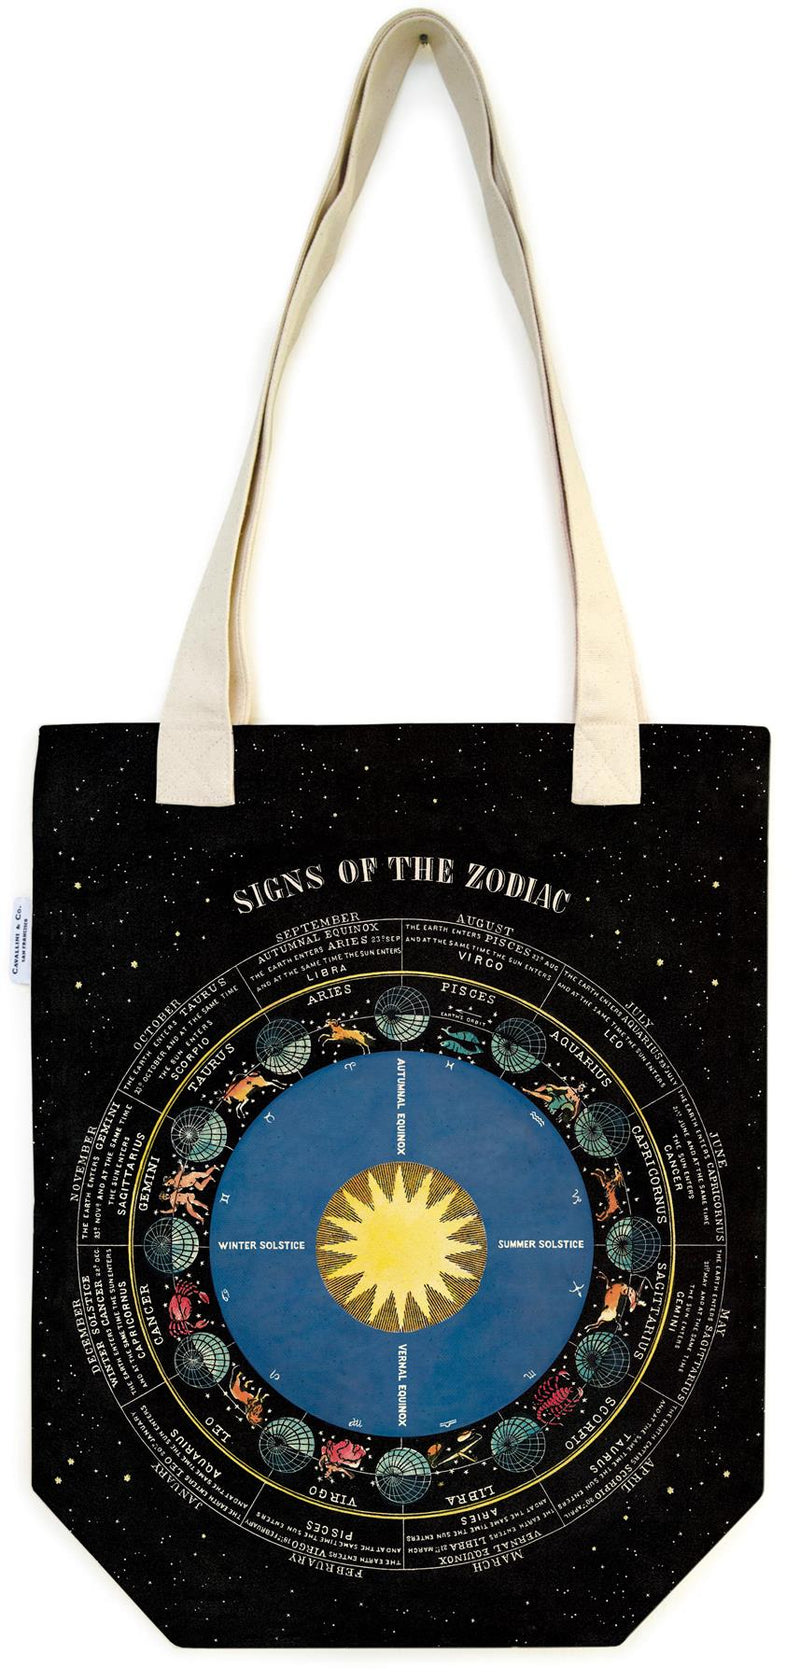 Cavallini - 100% Natural Cotton Vintage Tote Bag - 33x40.5cms - Signs Of The Zodiac